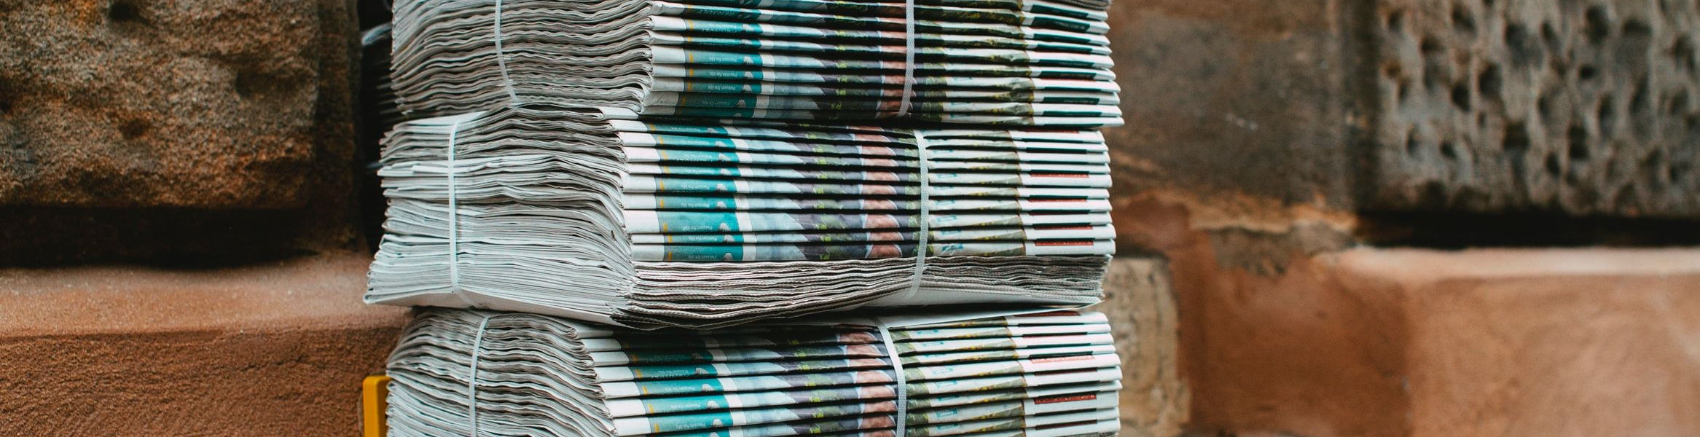 stack of newspapers on a doorstep